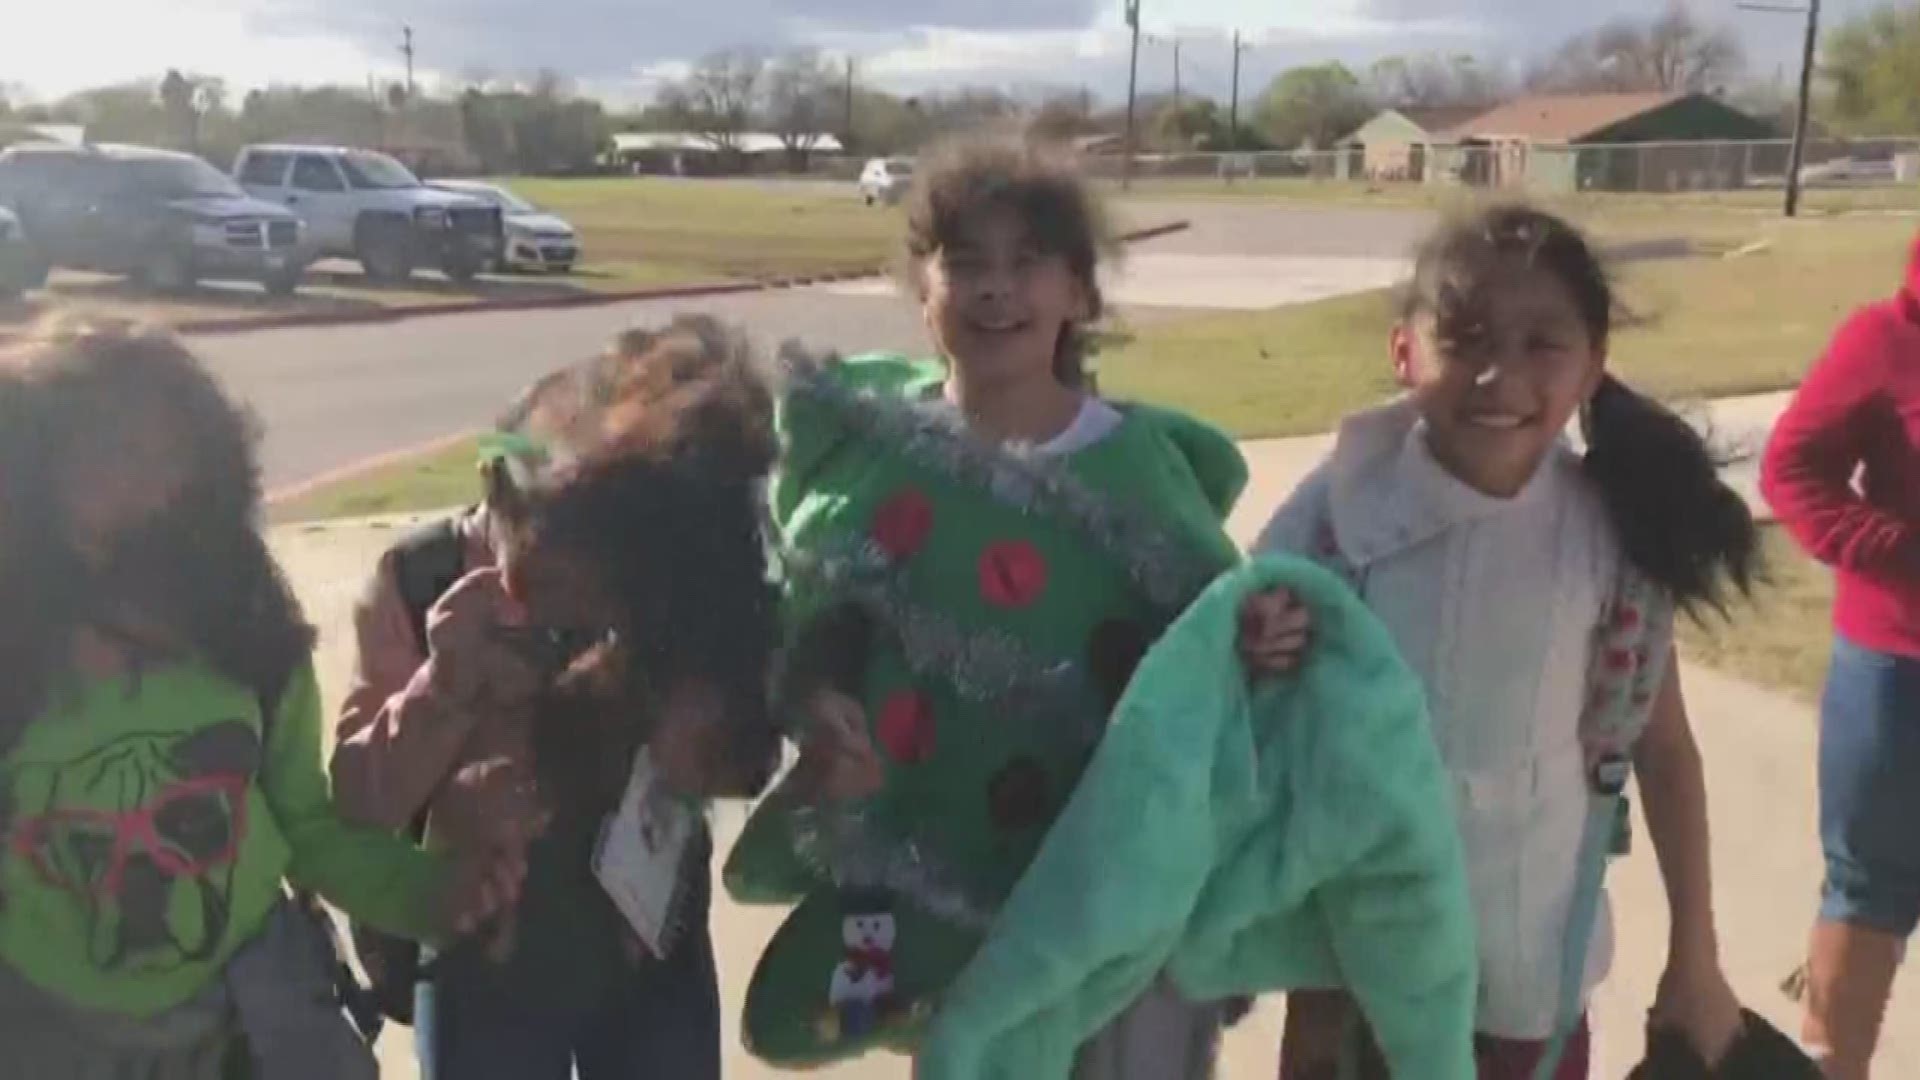 Wind gusts in the Texas town reached 71 mph Thursday, and some young school children had trouble staying upright in it!